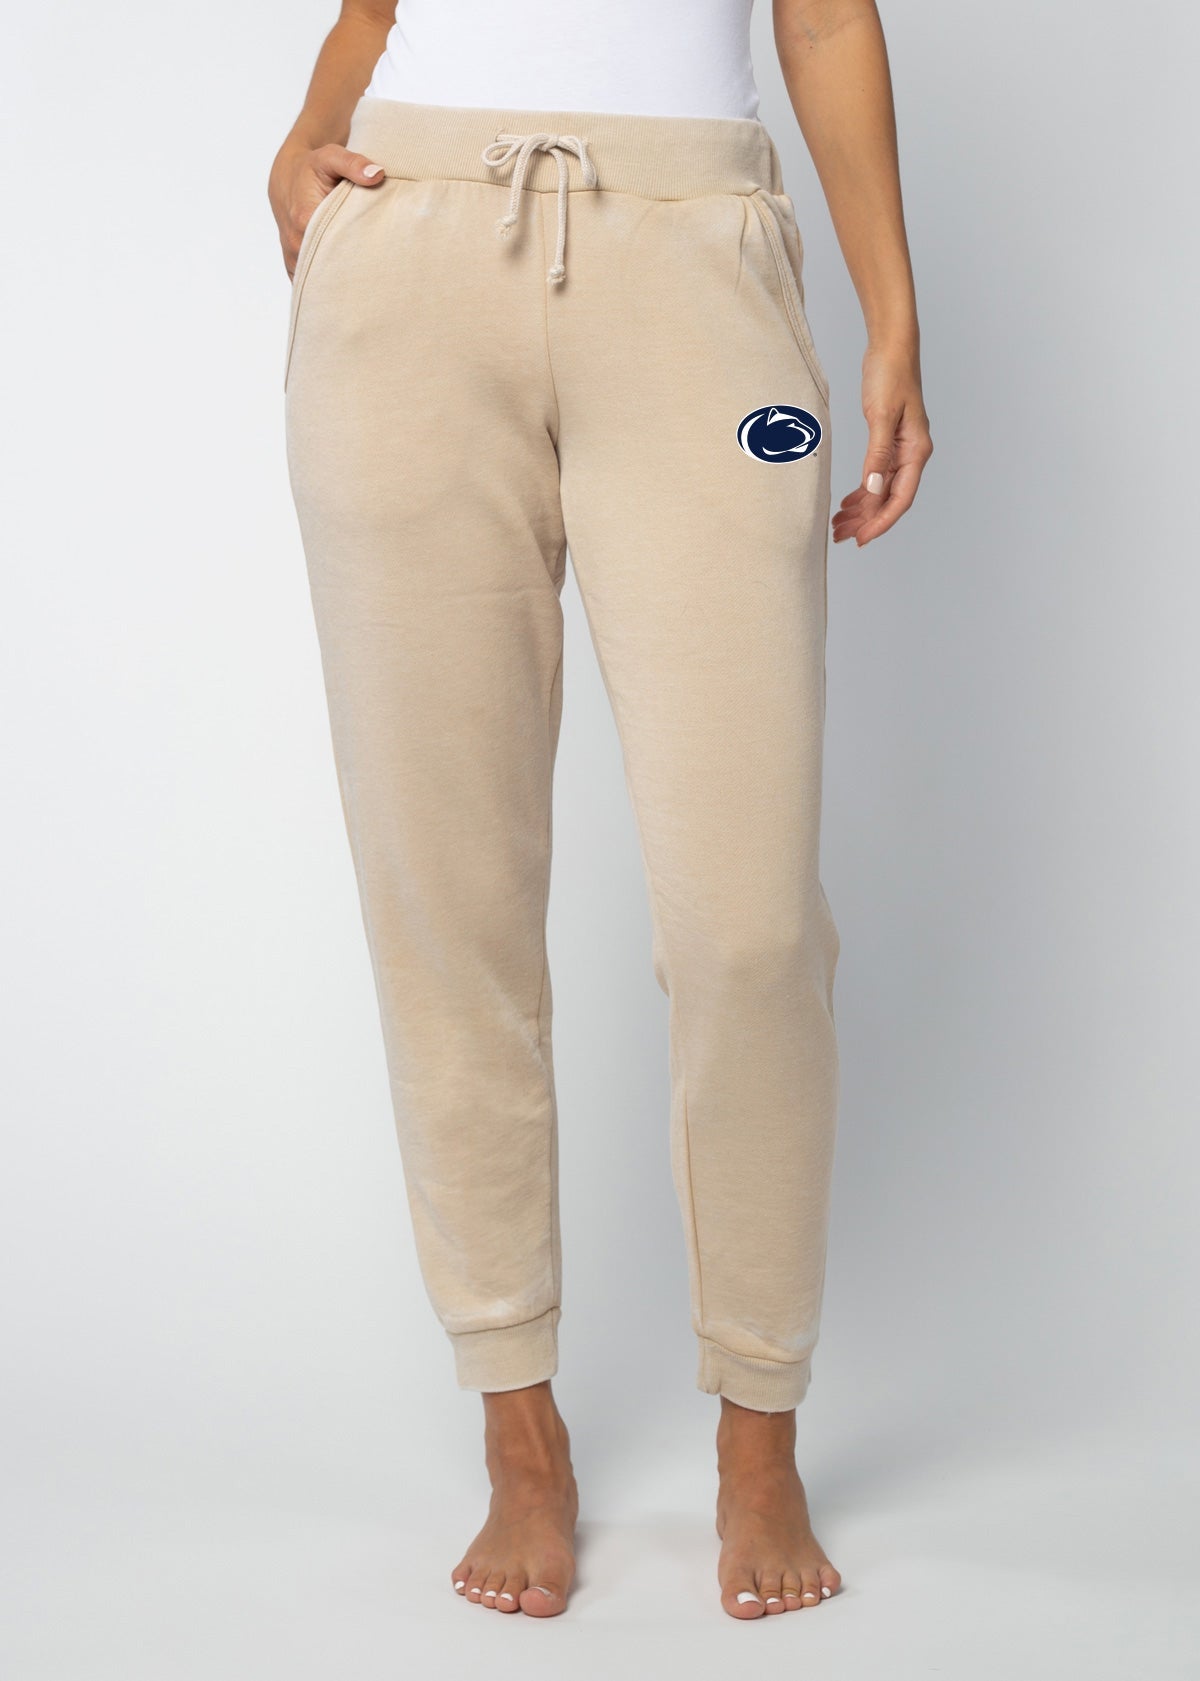 Penn State Nittany Lions sweatpants